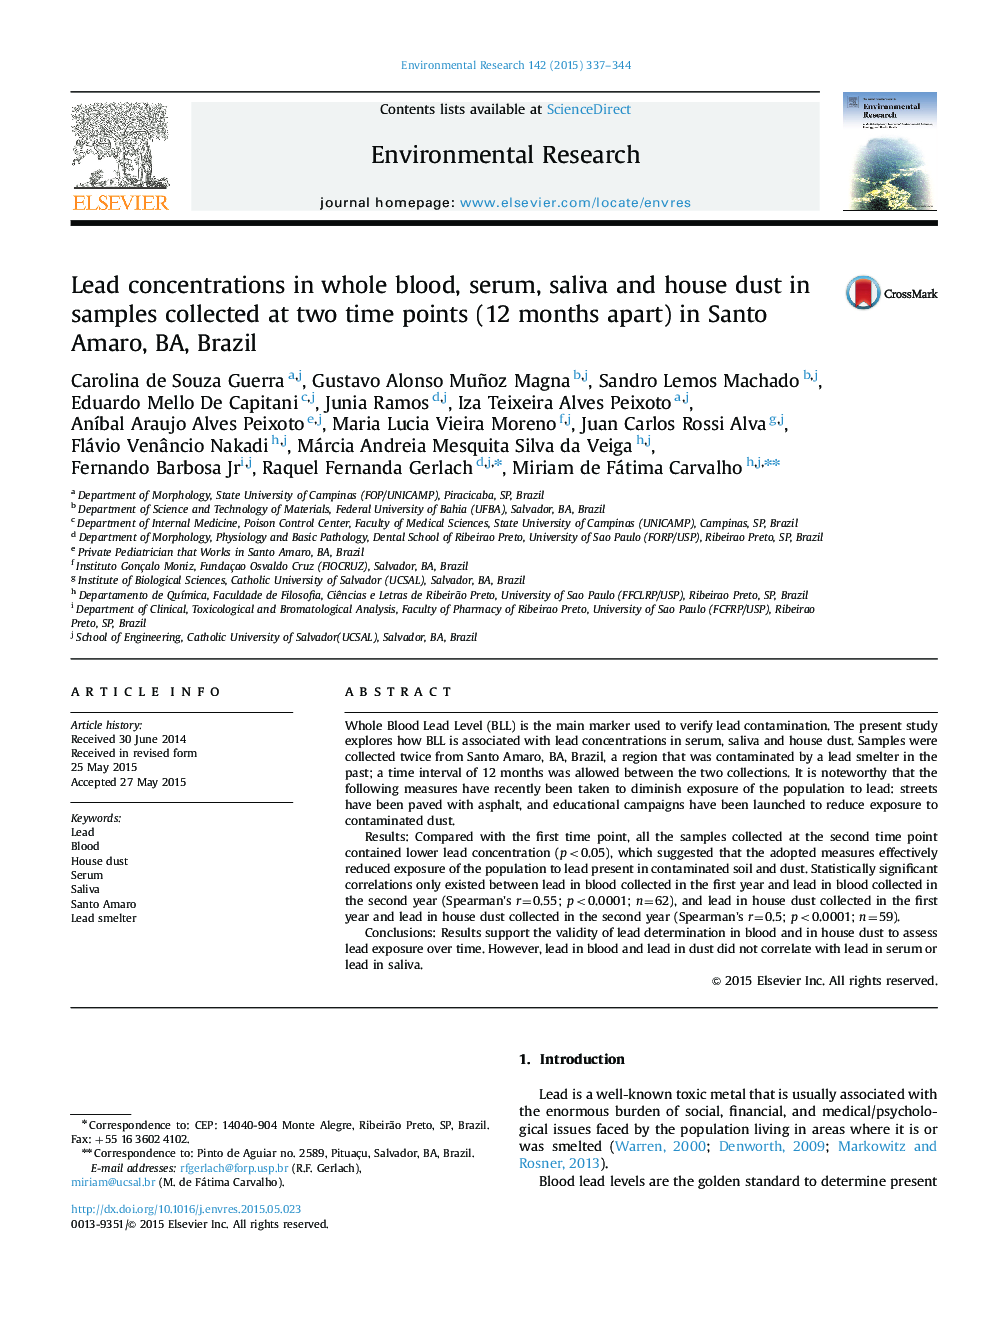 Lead concentrations in whole blood, serum, saliva and house dust in samples collected at two time points (12 months apart) in Santo Amaro, BA, Brazil